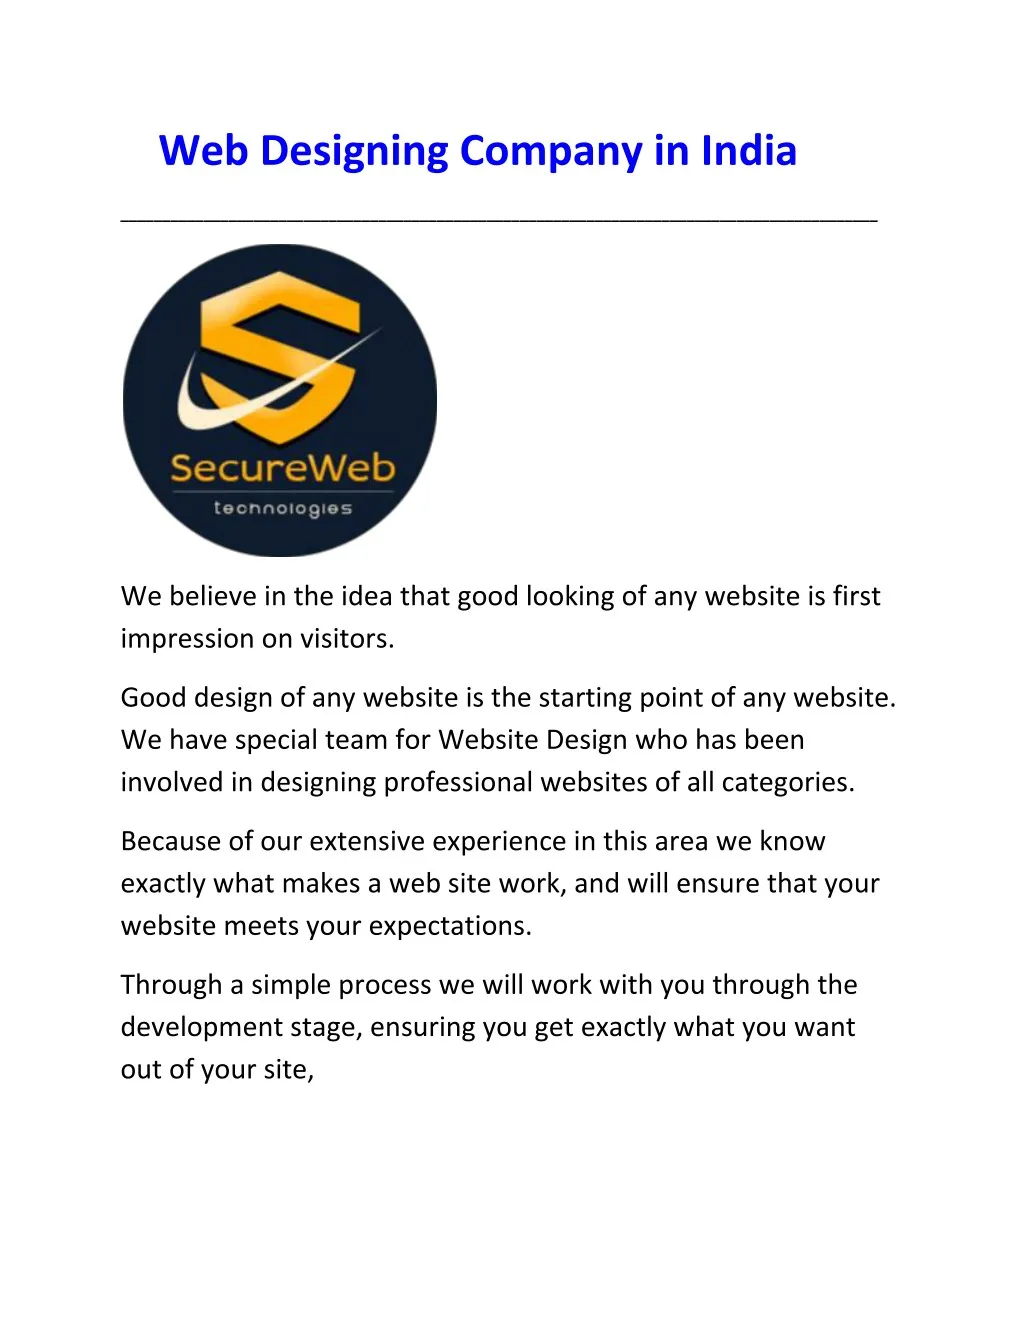 web designing company in india